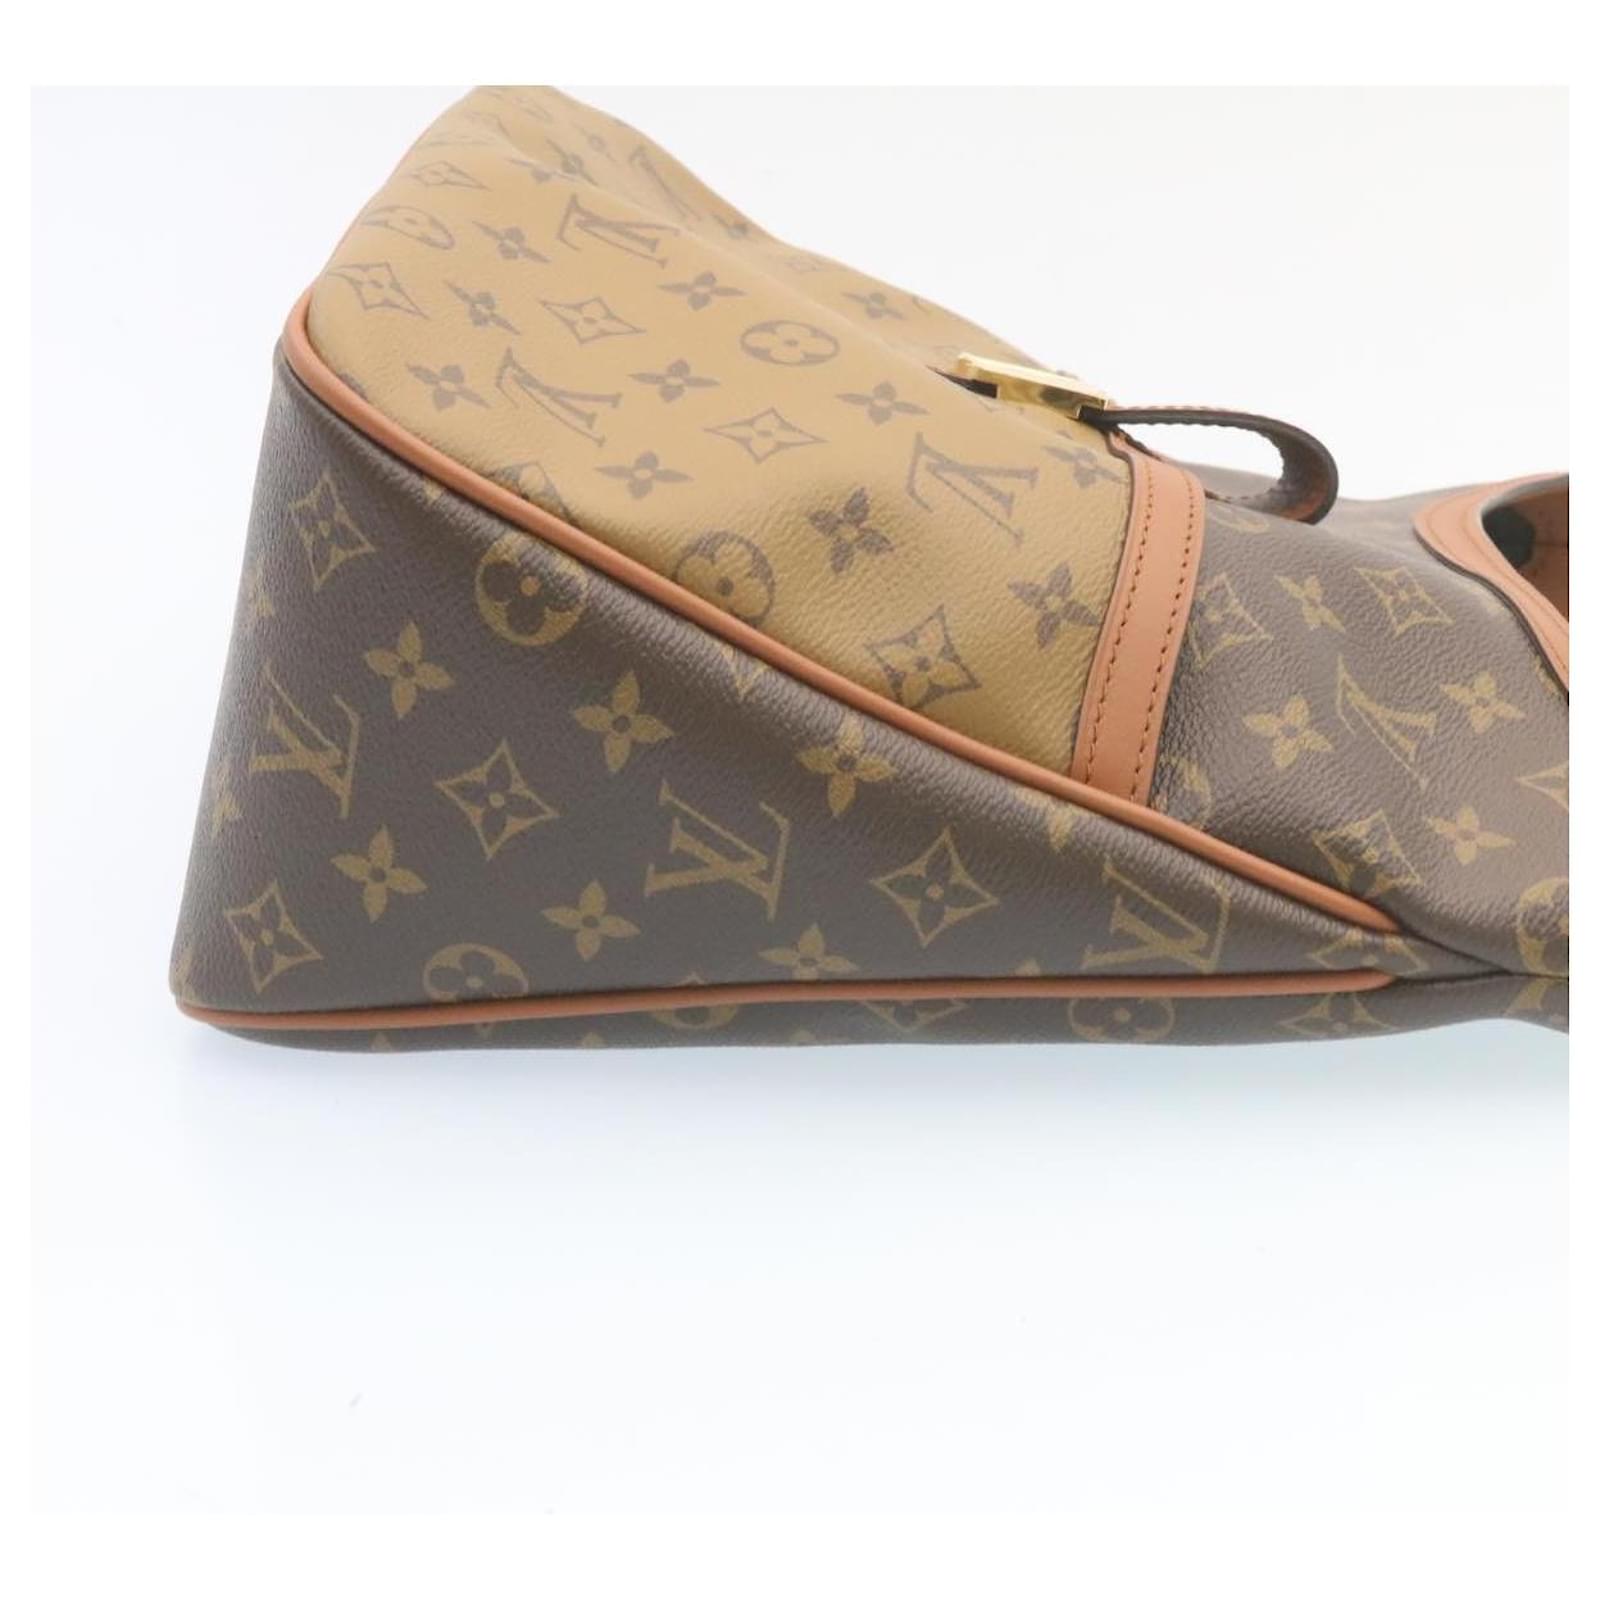 LOUIS VUITTON Women's Dauphine Hobo Leather in Brown